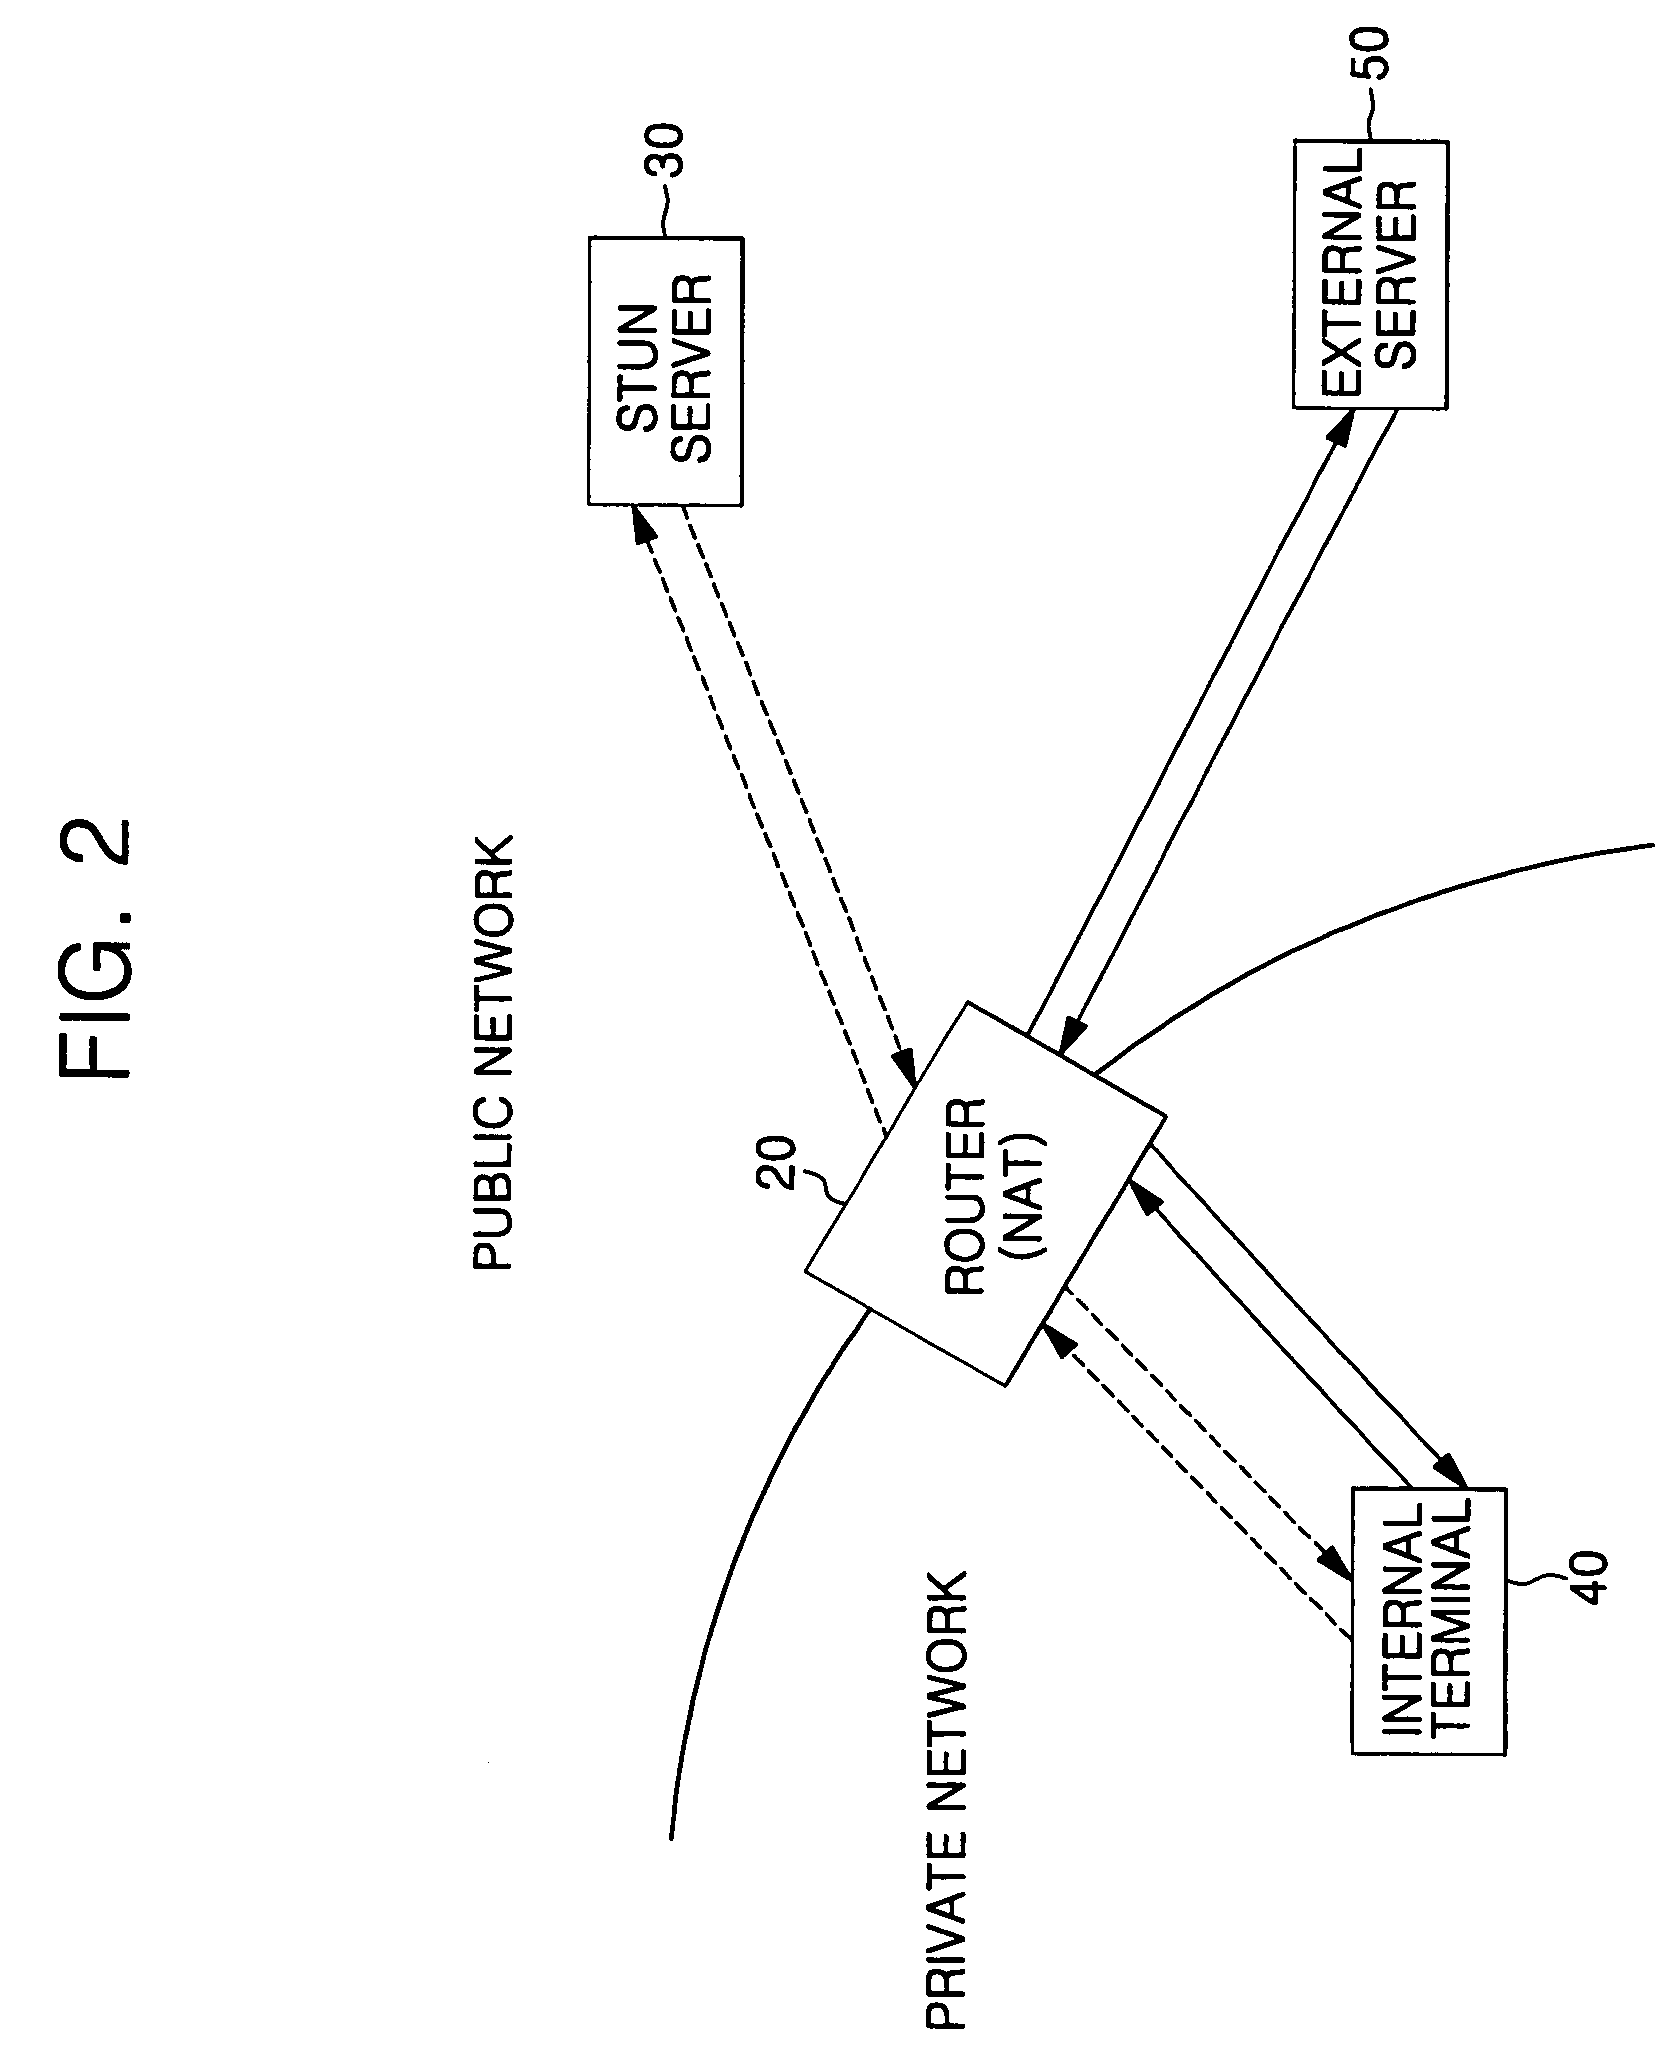 Symmetric network address translation system using STUN technique and method for implementing the same